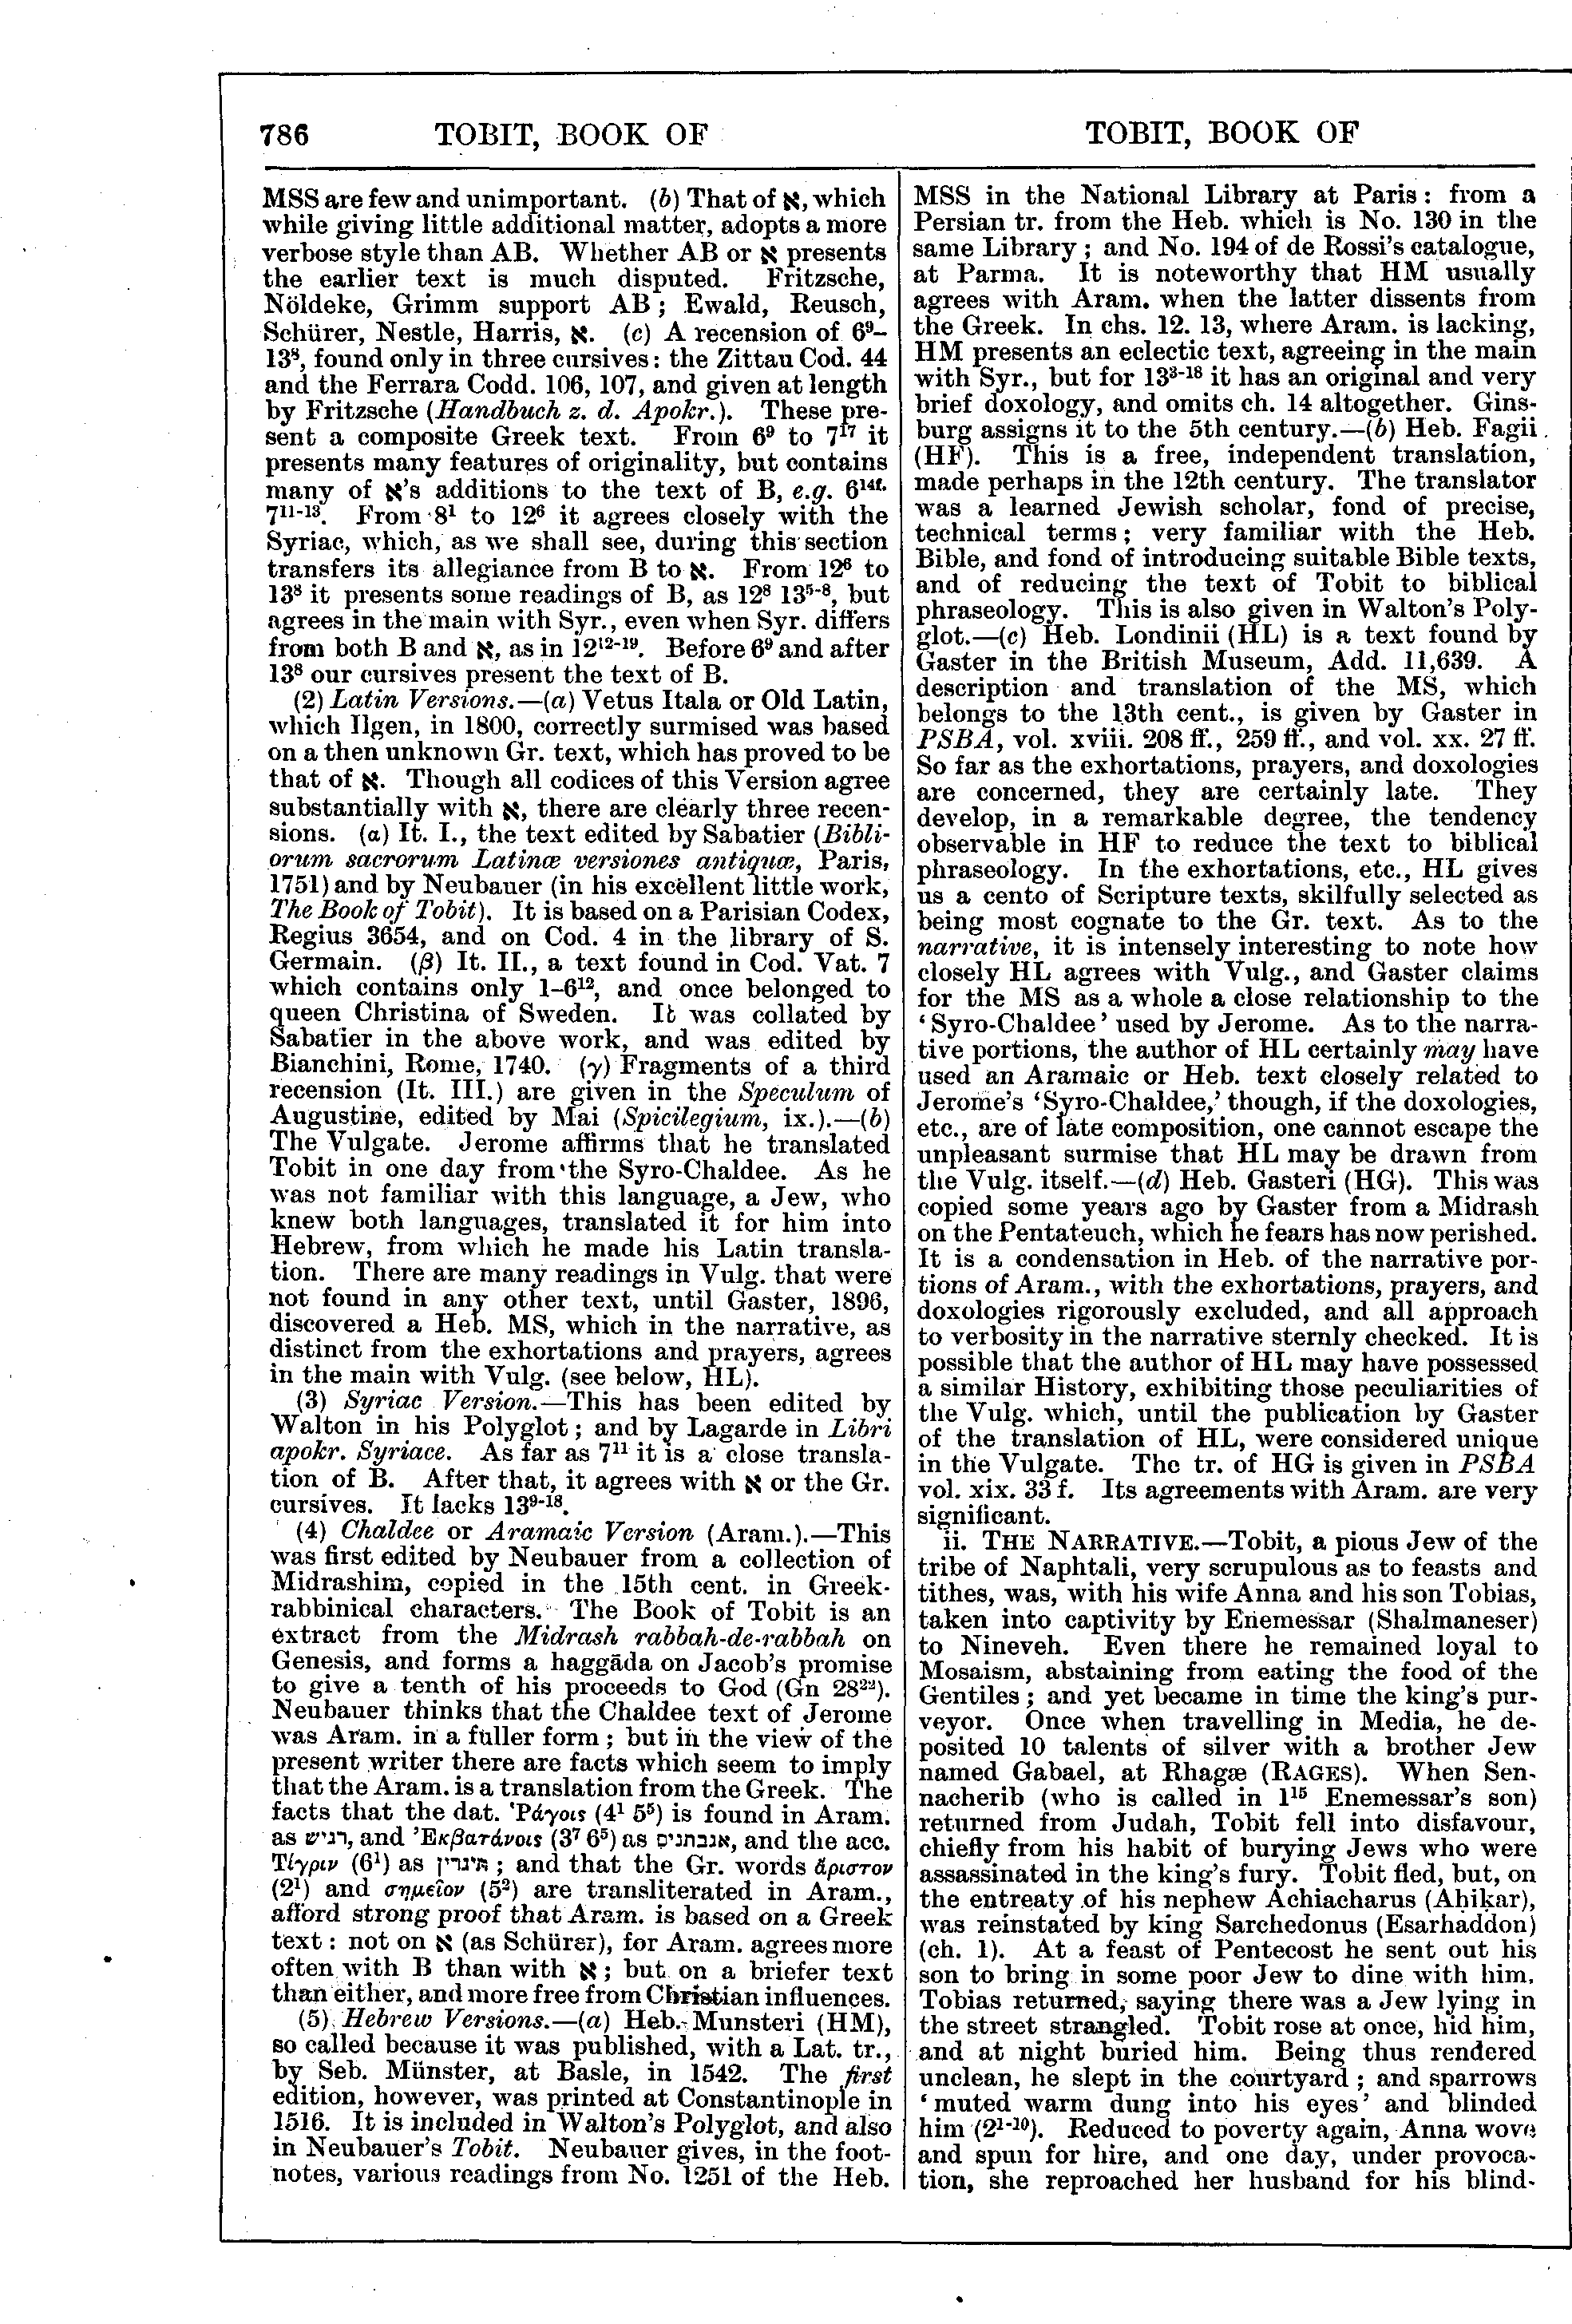 Image of page 786